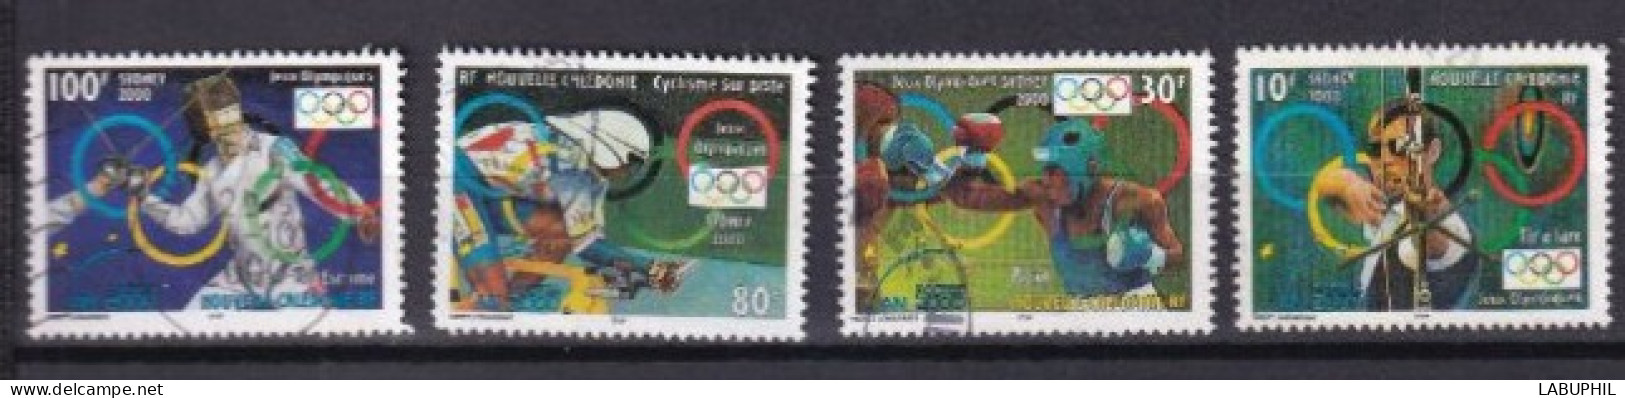 NOUVELLE CALEDONIE Dispersion D'une Collection Oblitéré Used  2000 - Used Stamps